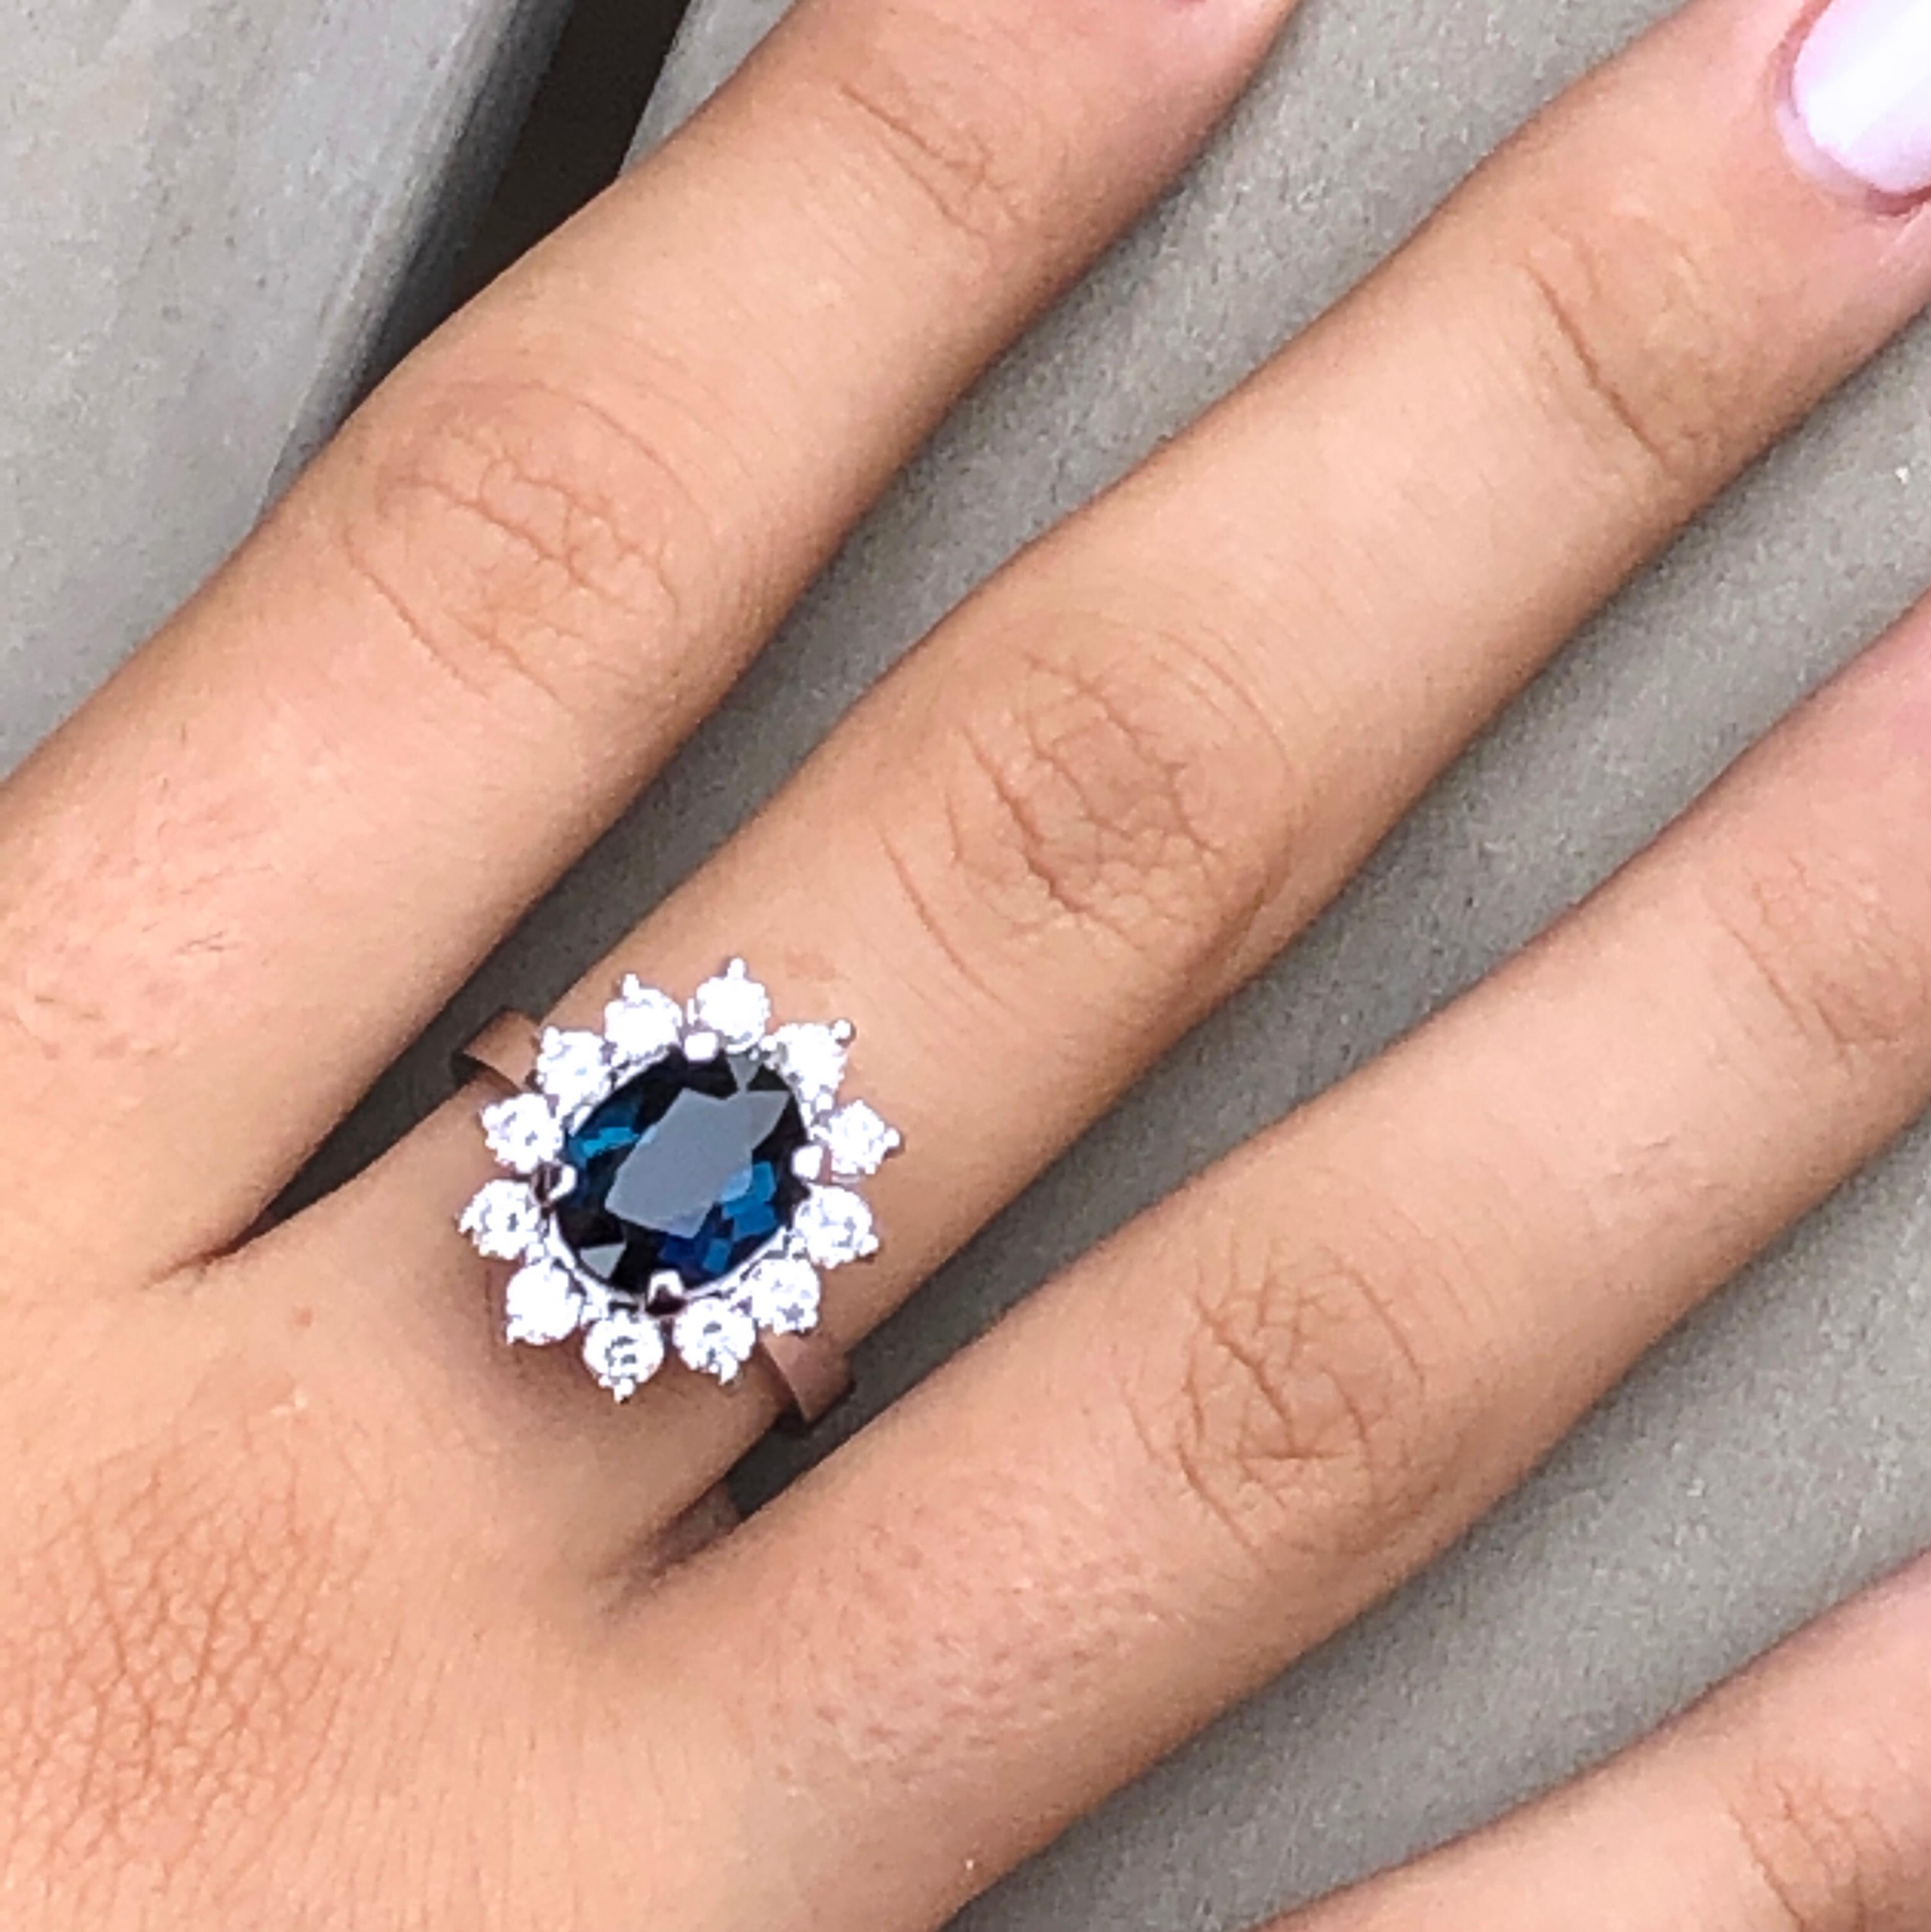 One-of-a-kind 2.70 Carat Oval Cut Indicolite, a Rare Indigo-Blue Tourmaline (0.317x0.399) in a smart and timeless White Diamond (1.02kt, D-E VVs1) 18 kt White Gold Ballerina Setting. The color of this beautiful stone is absolutely natural, not